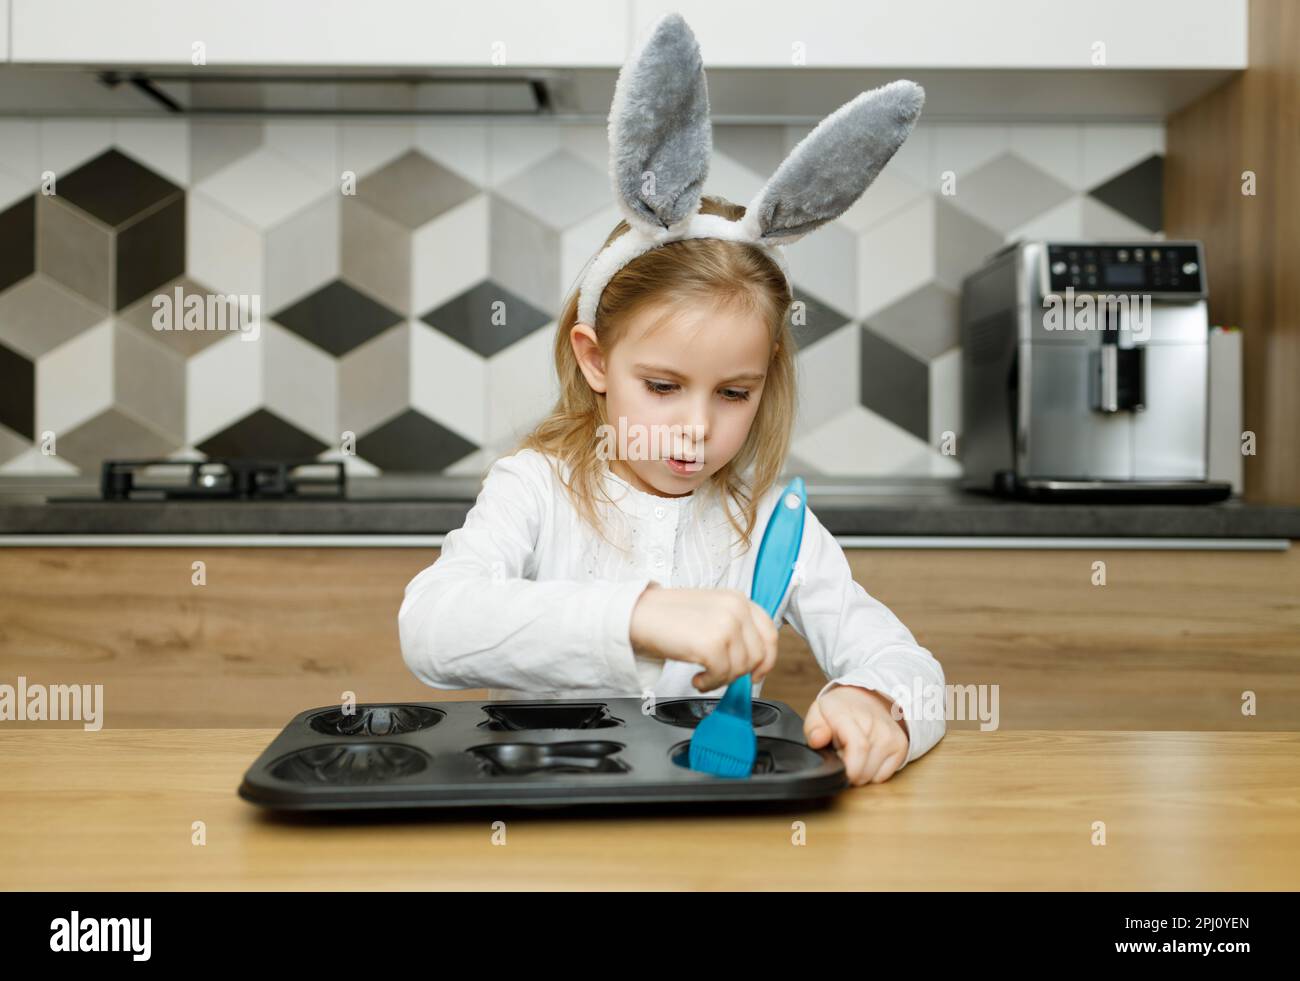 Serious child ittle girl in bunny ears lubricate baking dish with blue silicone brush with olive oil in modern wooden kitchen at home. Easter concept, Stock Photo